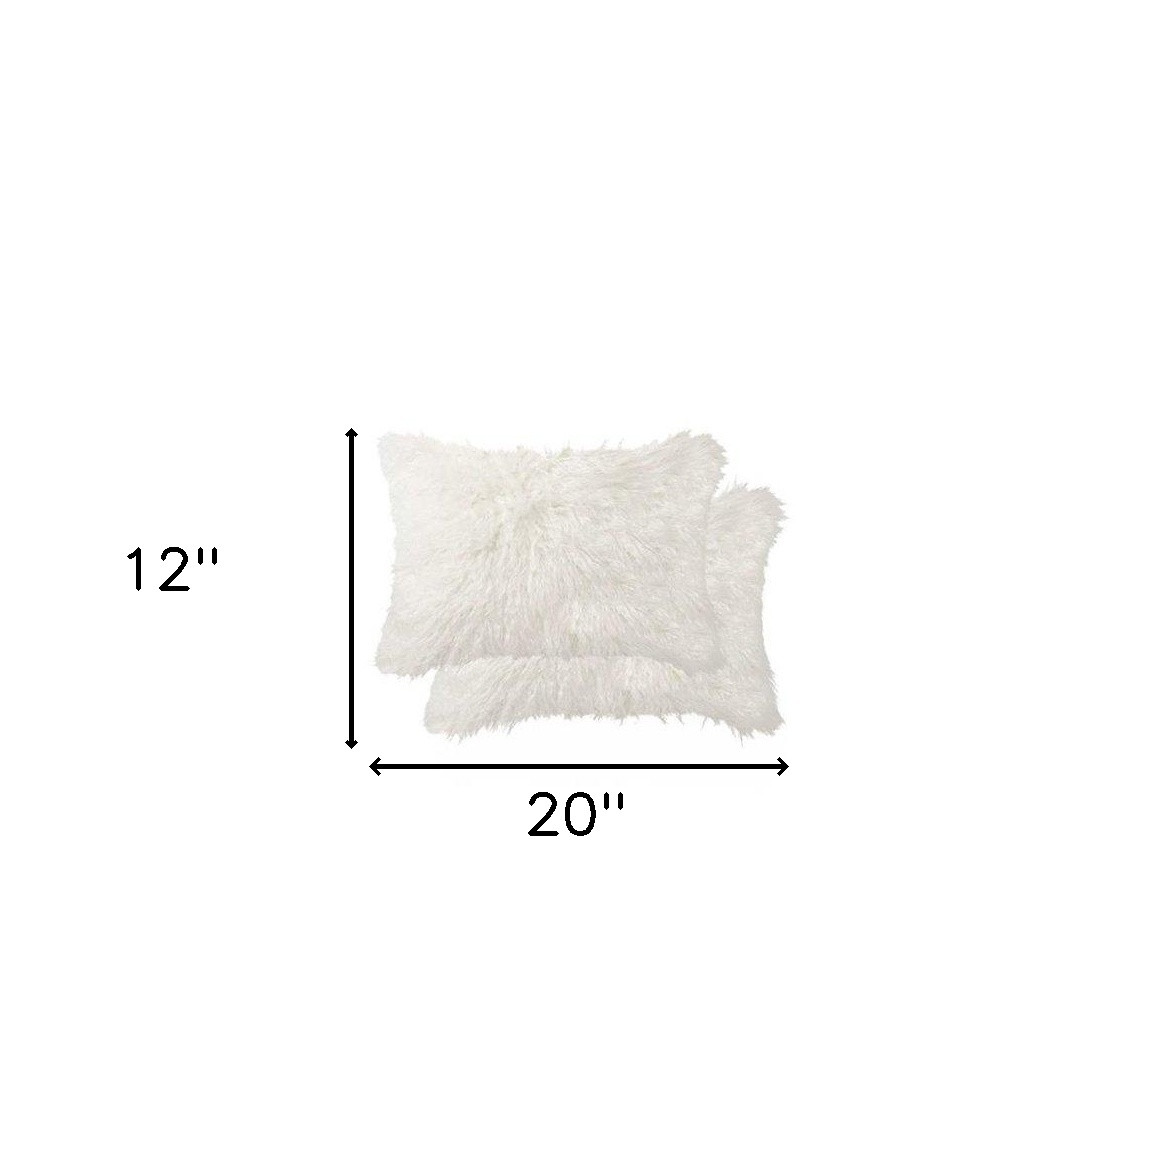 12" x 20" x 5" Off White Faux - Pillow 2-Pack